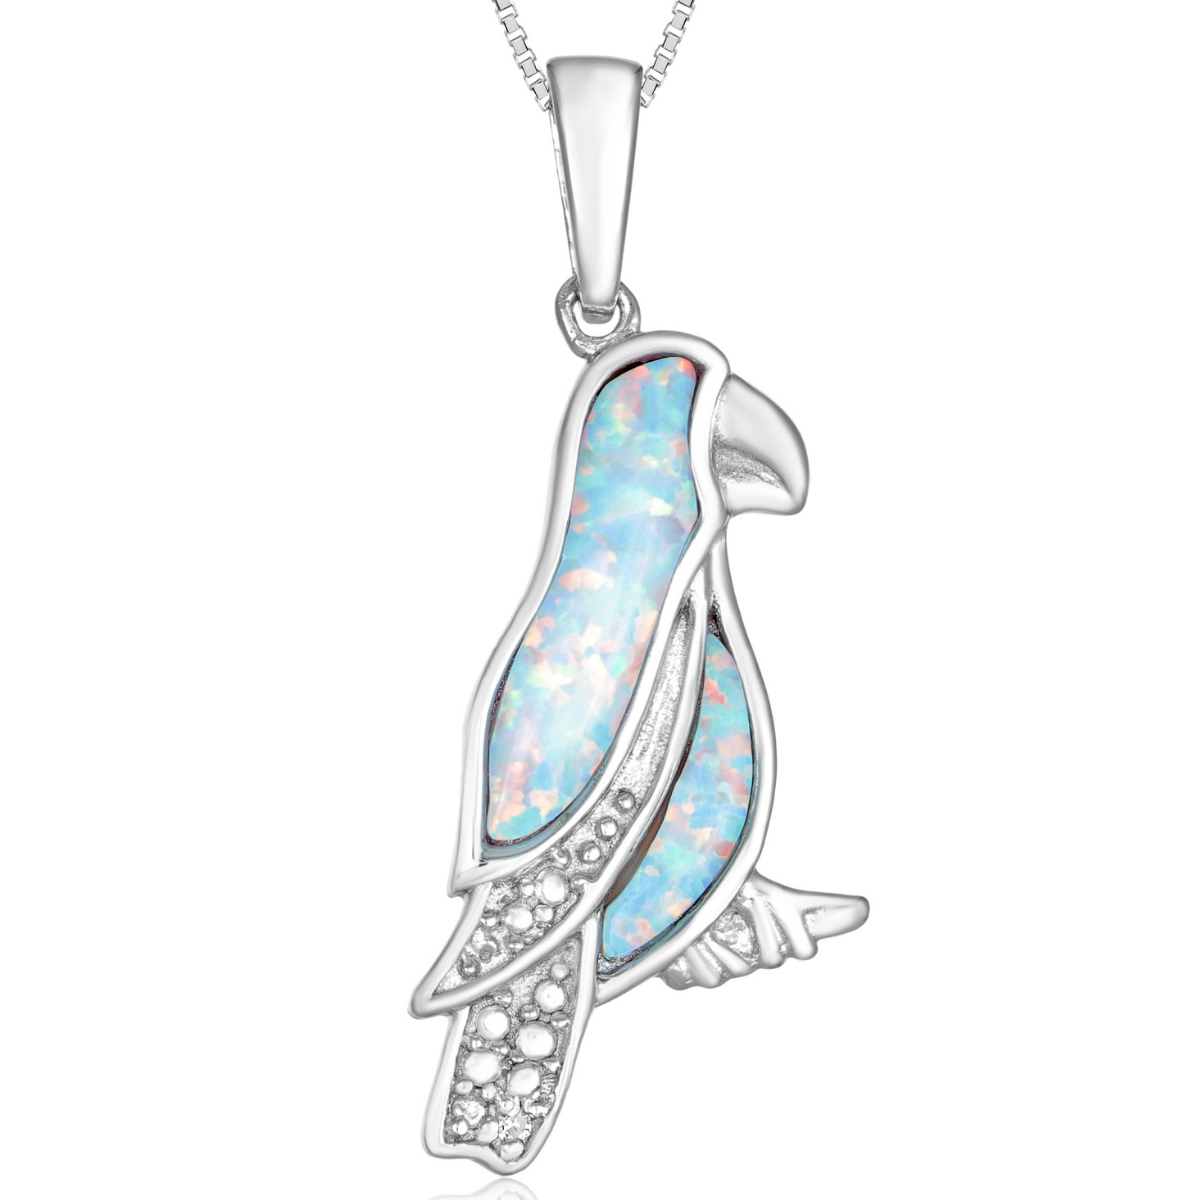 Lavari Jewelers Women's Created White Opal Parrot Diamond Pendant with Lobster Clasp, Sterling Silver, .015 Cttw, 18 Inch Cable Chain